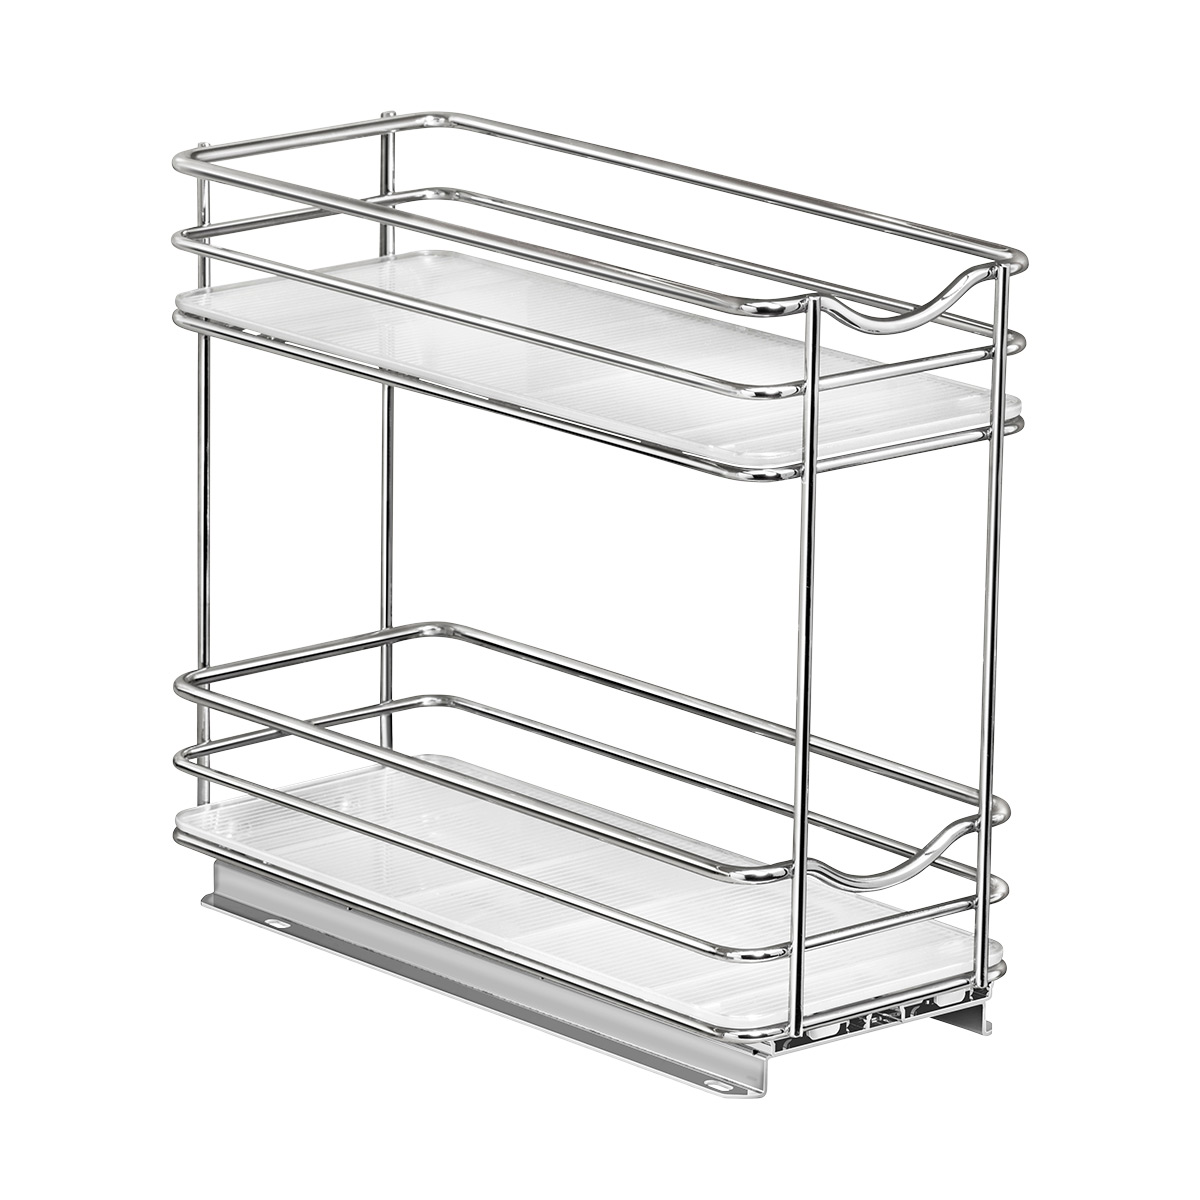 https://www.containerstore.com/catalogimages/364490/10077292-Lynk-Double-Spice-Narrow-Ch.jpg